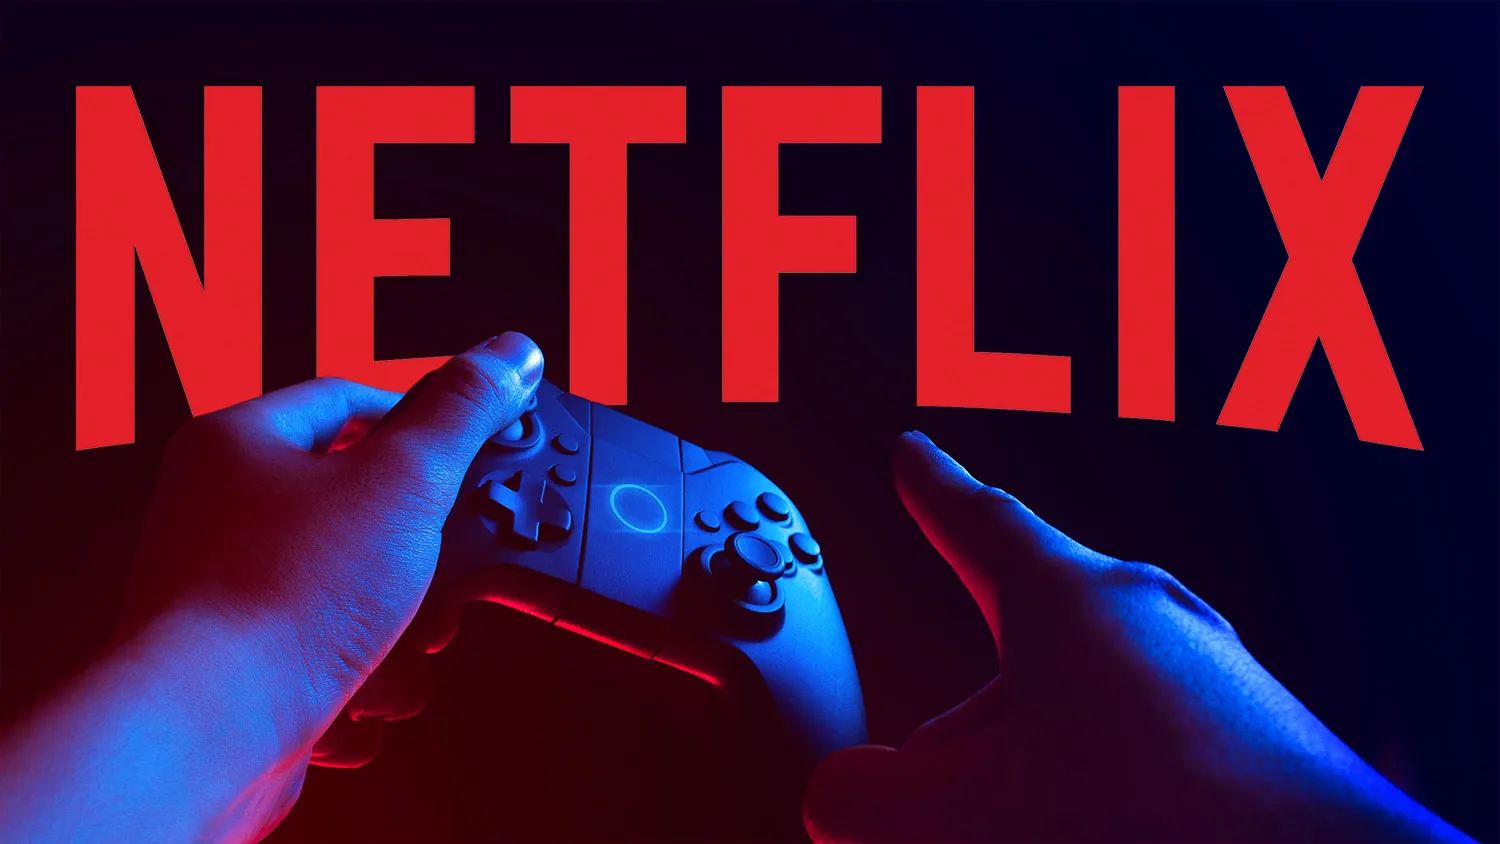 Is the Dream of Unlimited Gaming Like Netflix Too Far Off? Experts Dive Into the Future of Game Streaming